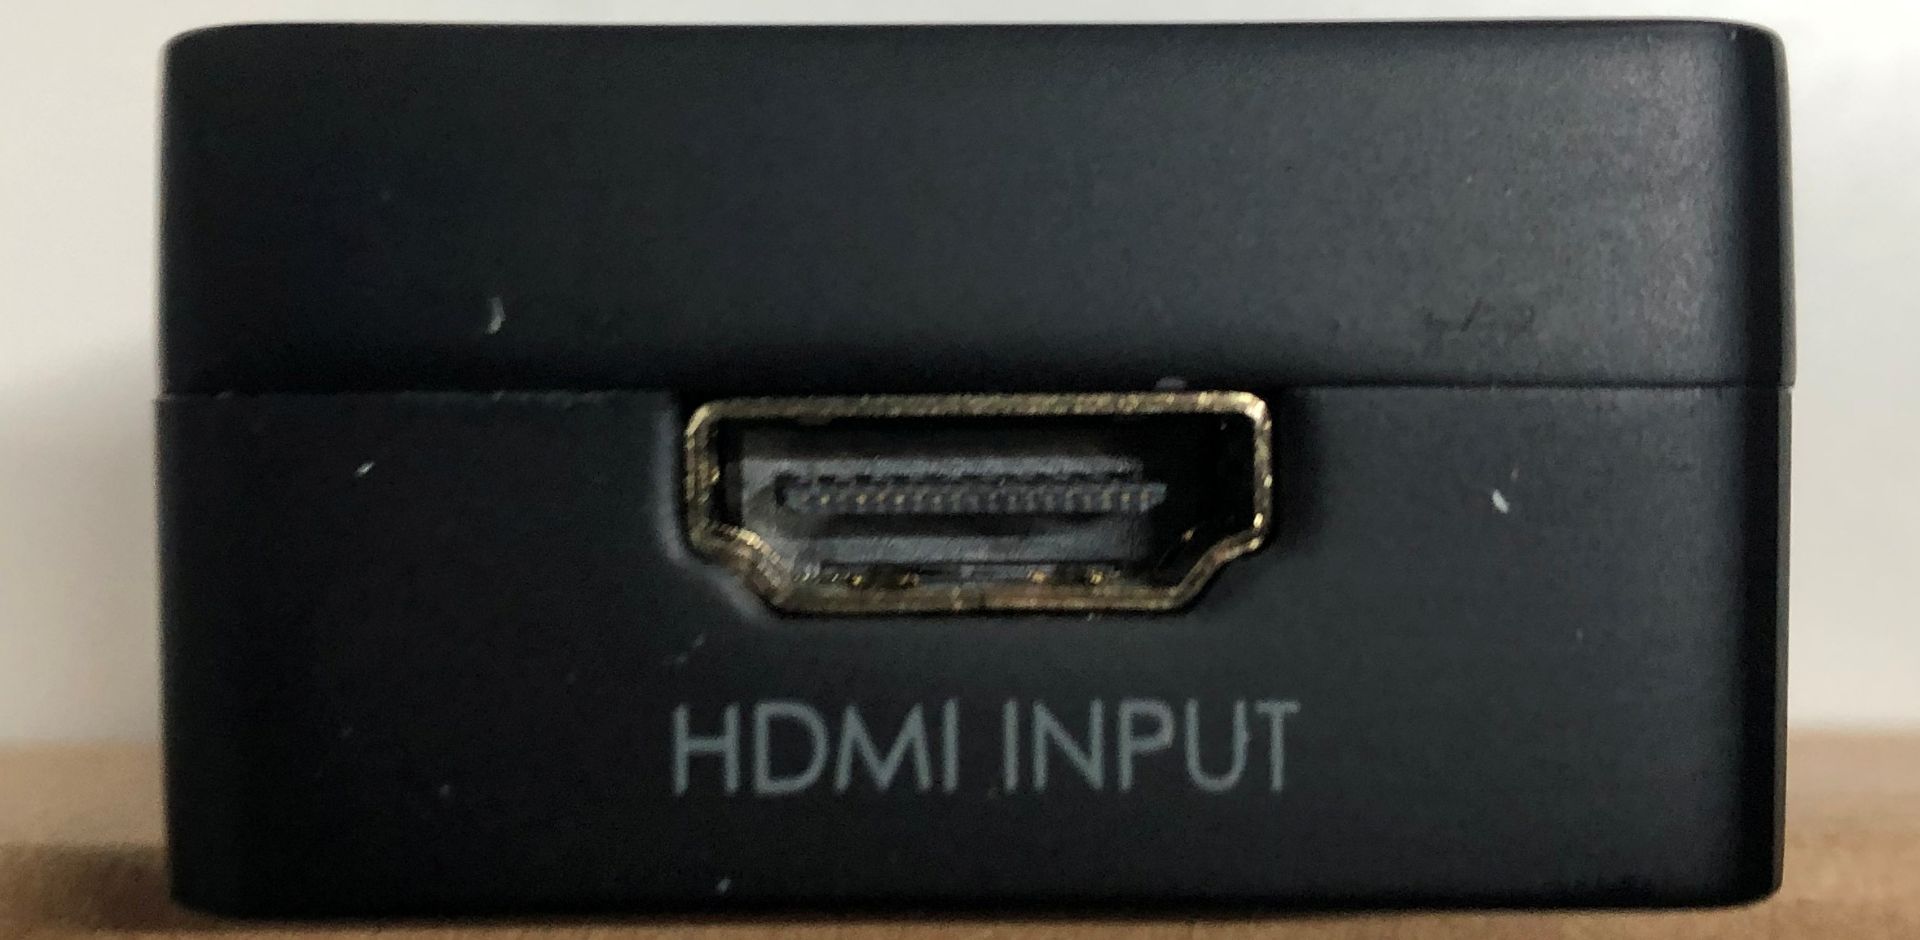 Get connected pro HDMI to VGA converter - Image 4 of 4